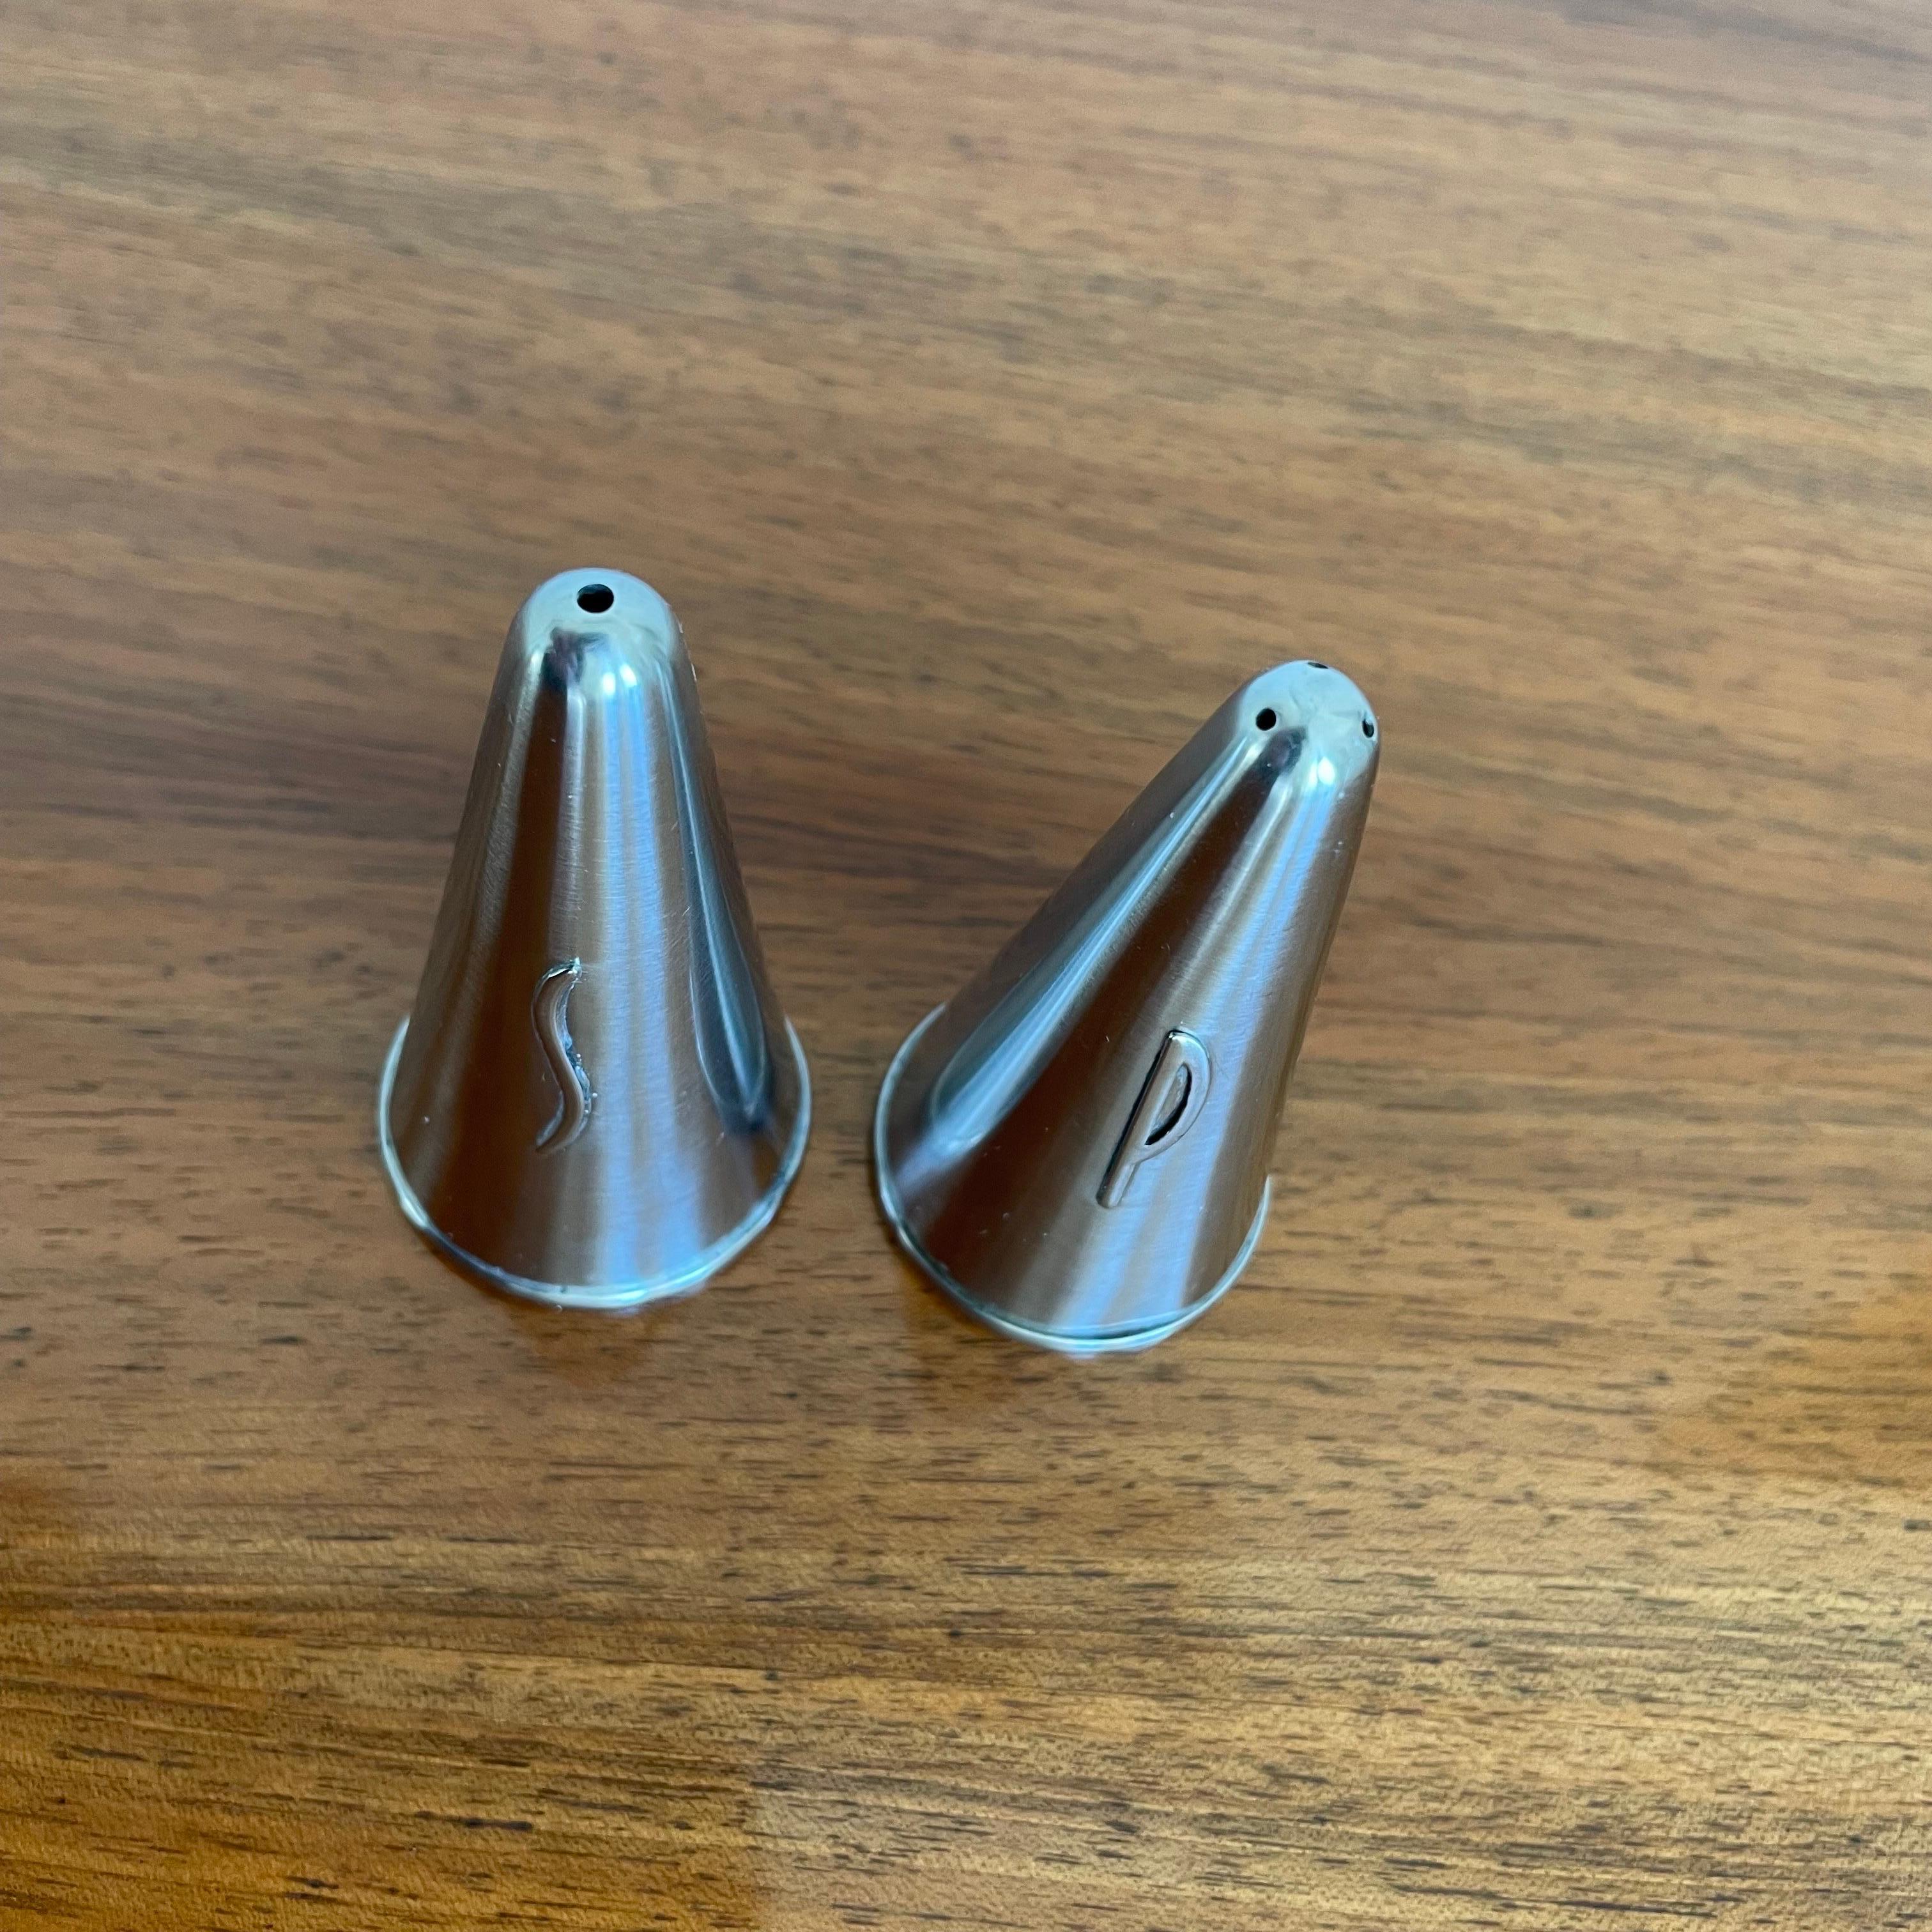 mid century modern salt and pepper shakers